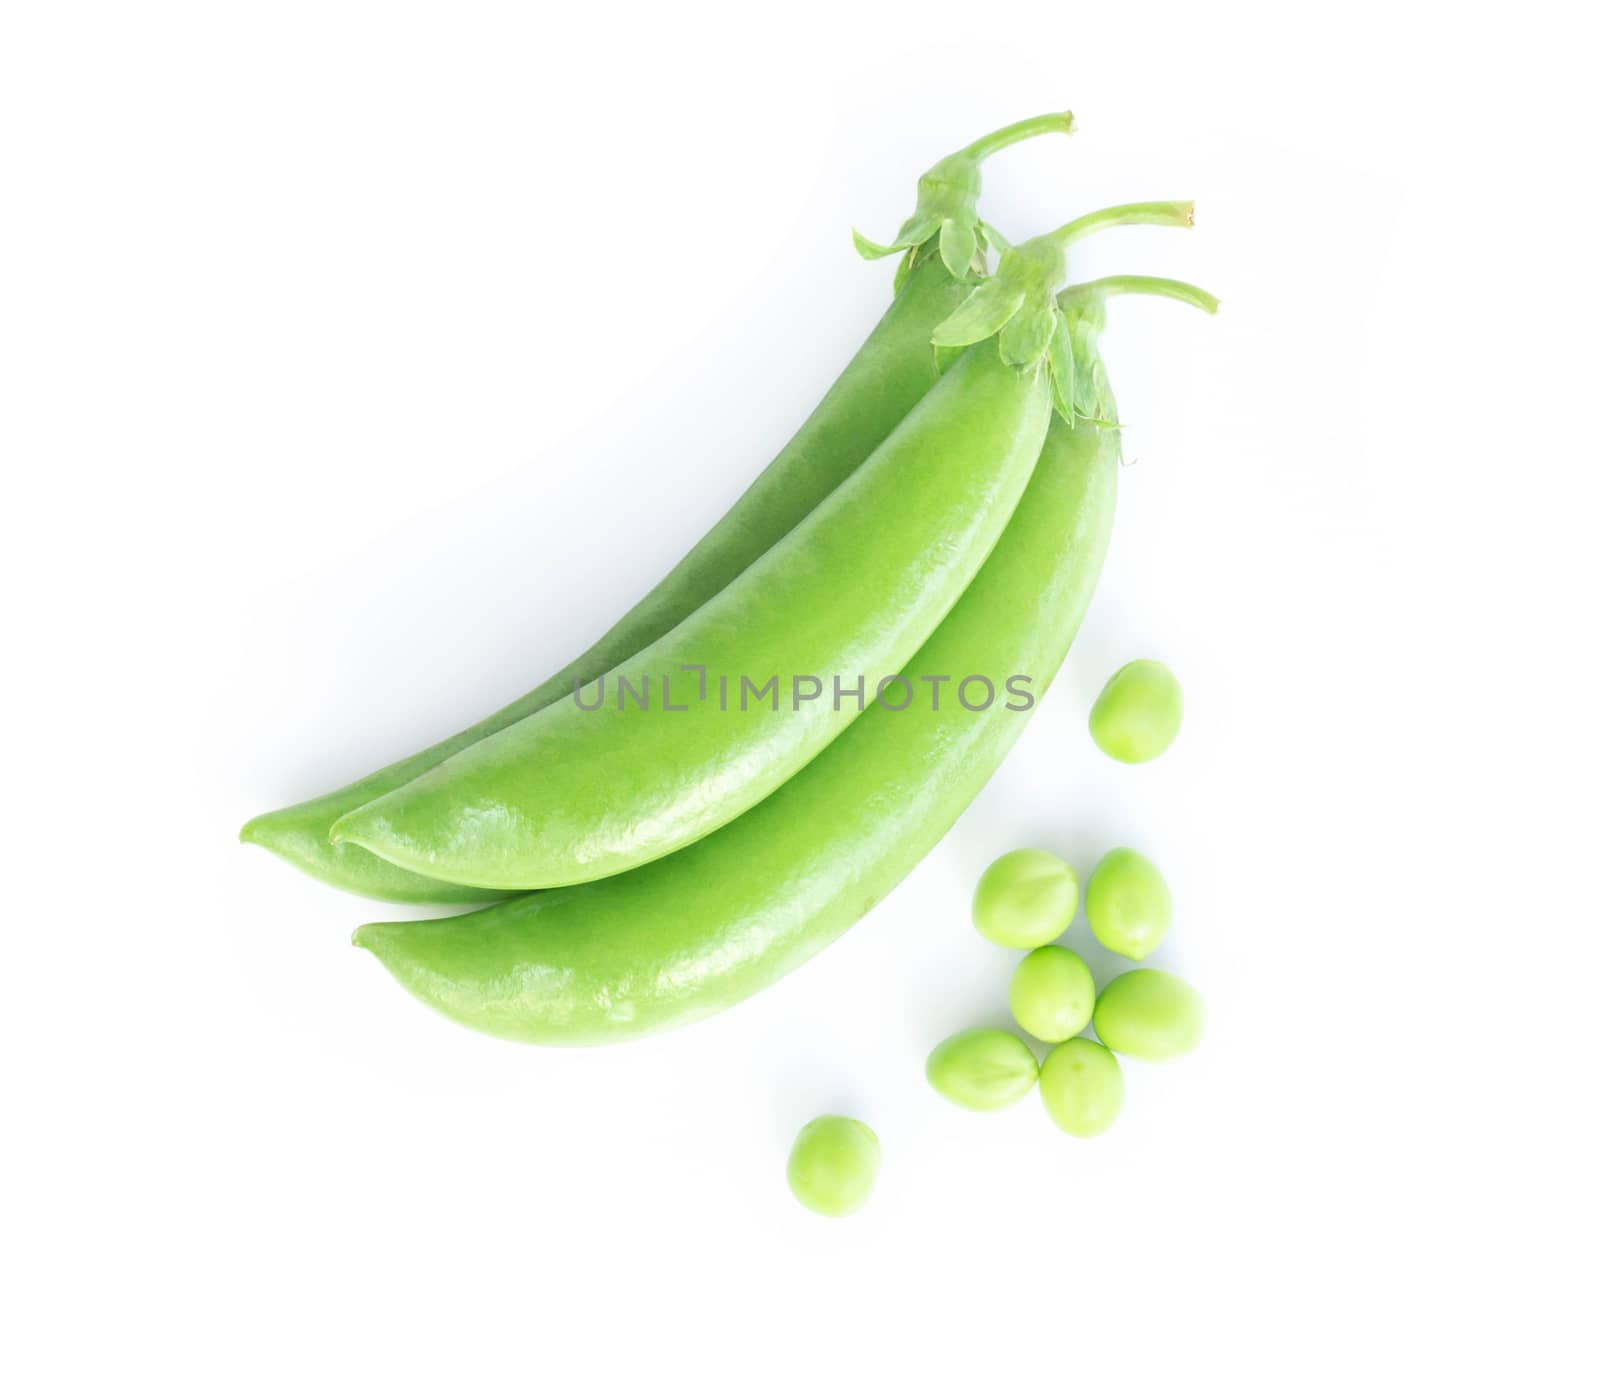 Closeup top view fresh green peas isolated on white background, healthy food concept